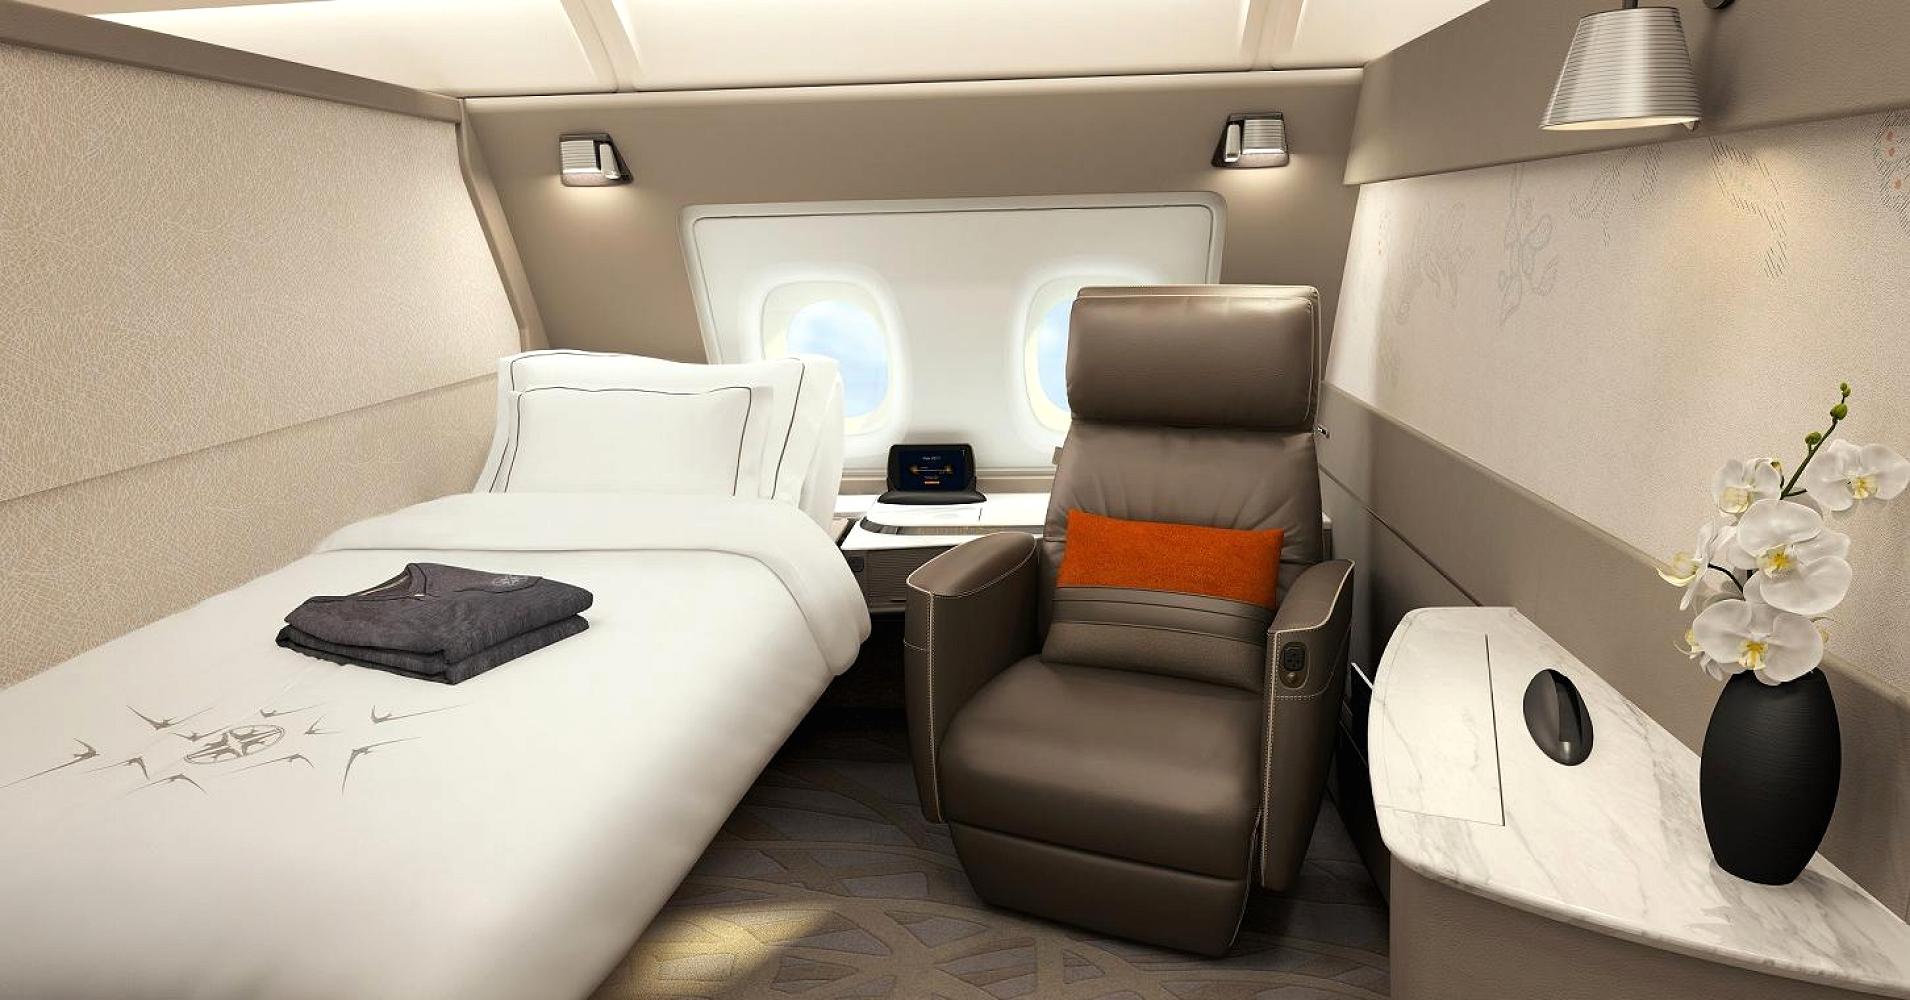 Singapore Airlines’ latest cabin overhaul sees swanky luxury apartments in the sky